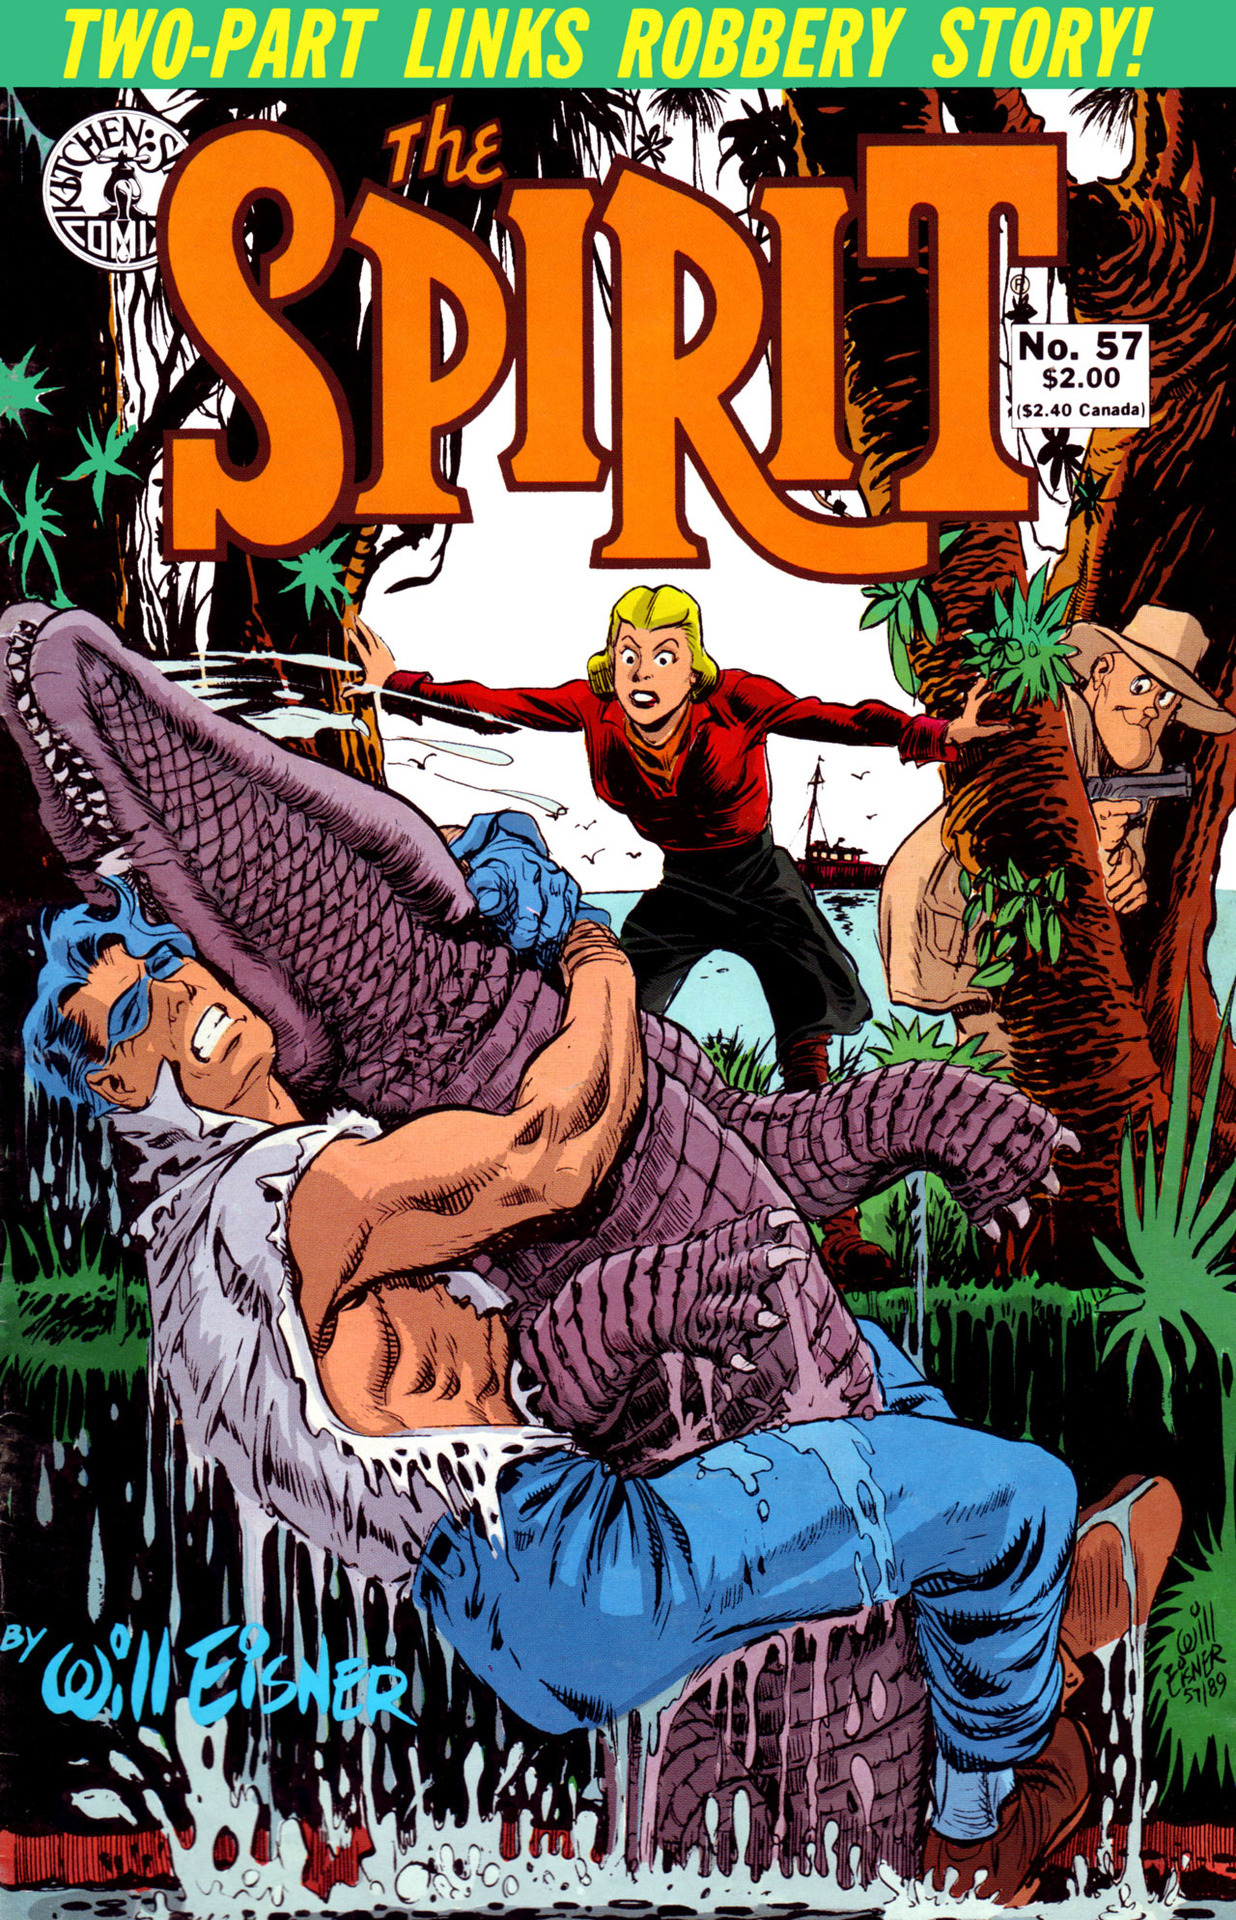 comicbookcovers:  The Spirit #57, July 1989, cover by Will Eisner   the story of